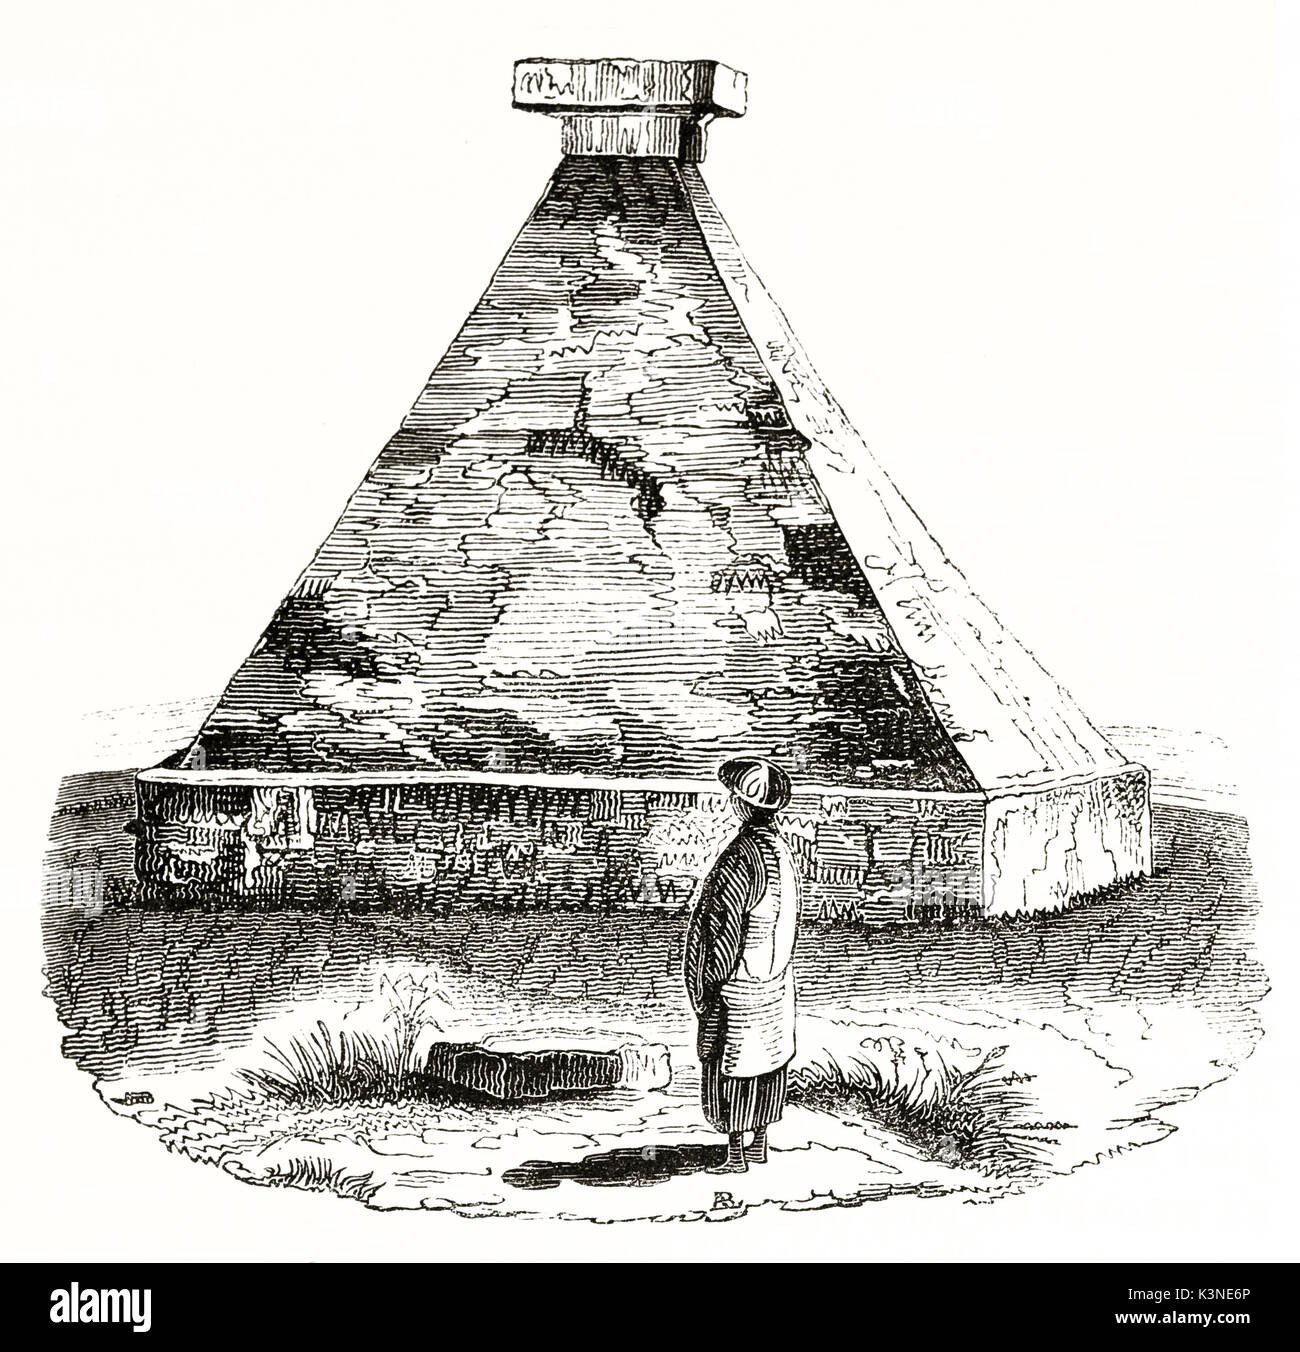 Old illustration of pyramidal Cochinchina stone tomb and a single man looking at it. By unidentified author published on Magasin Pittoresque Paris 1839 Stock Photo